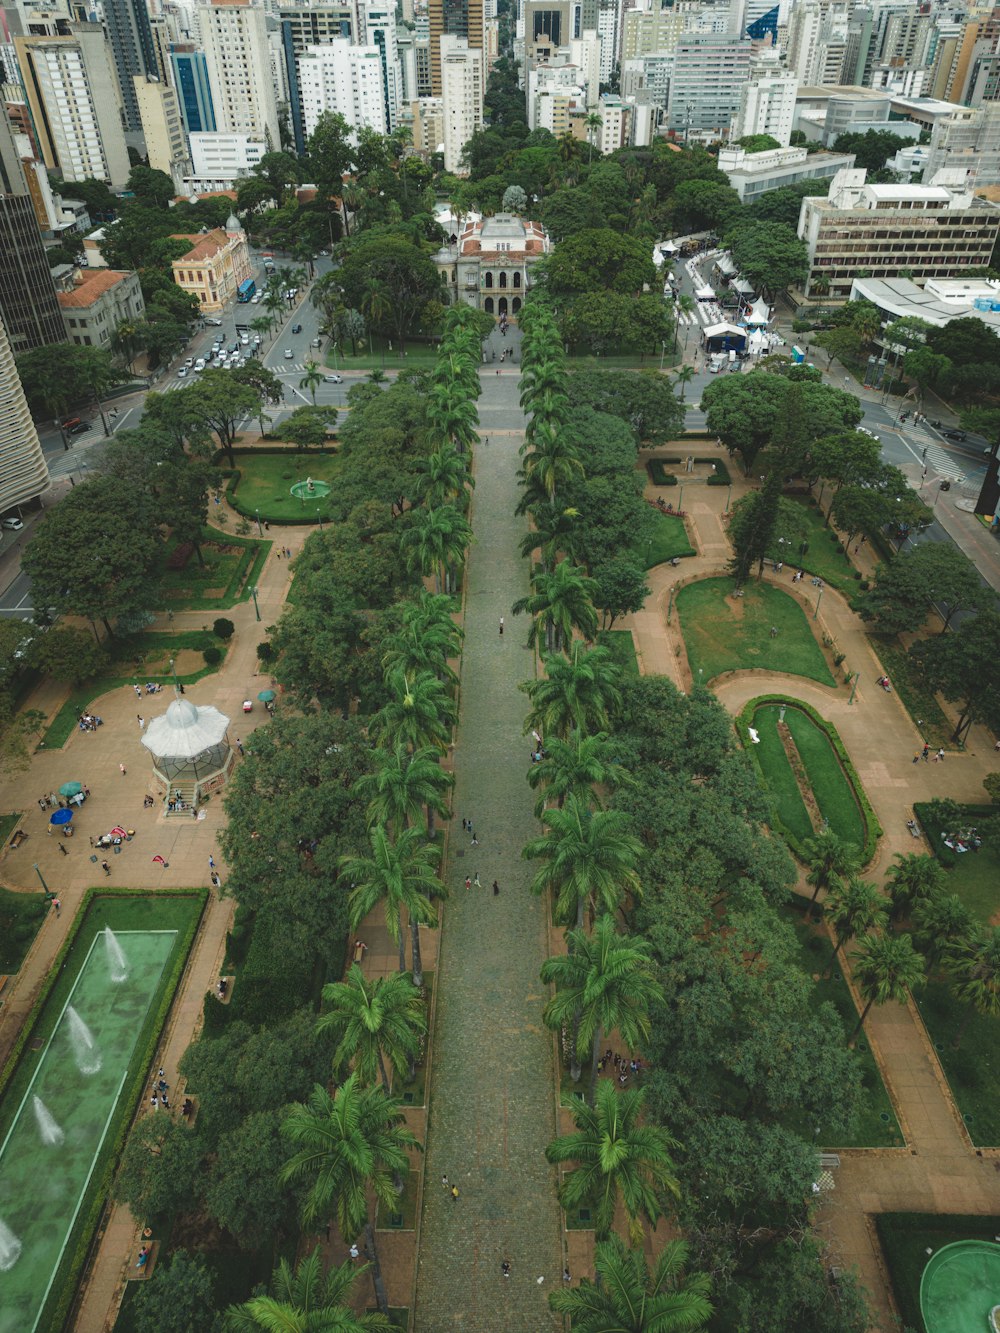 an aerial view of a city park with lots of trees